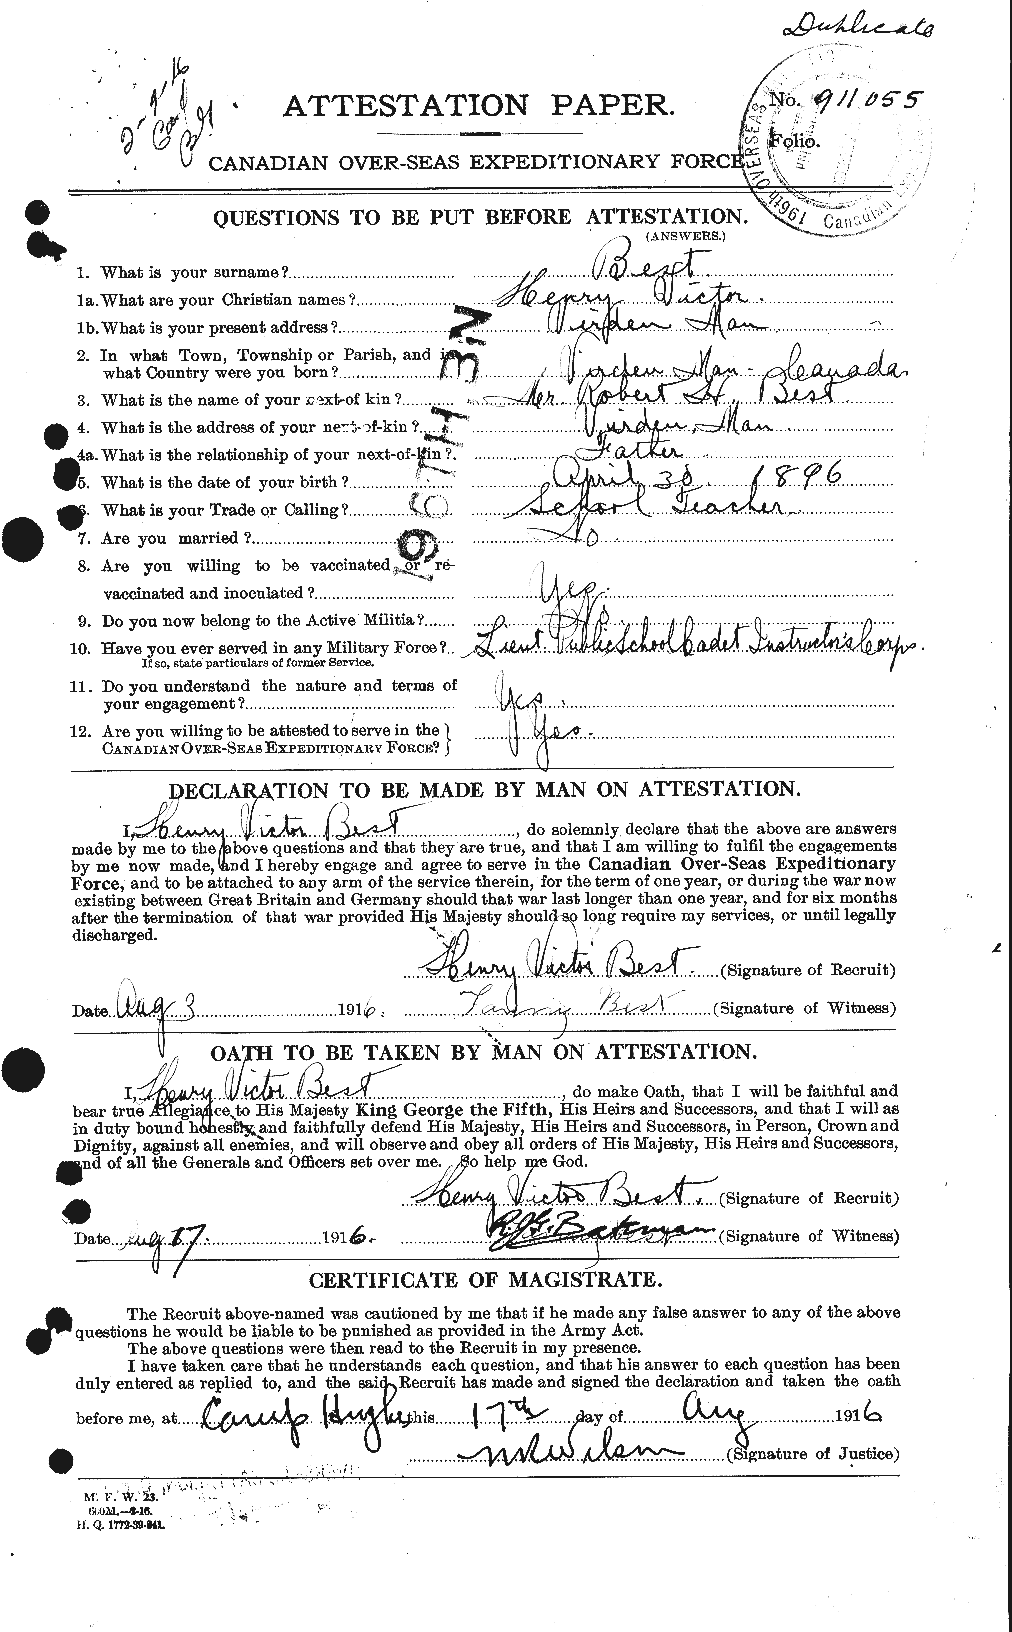 Personnel Records of the First World War - CEF 240273a